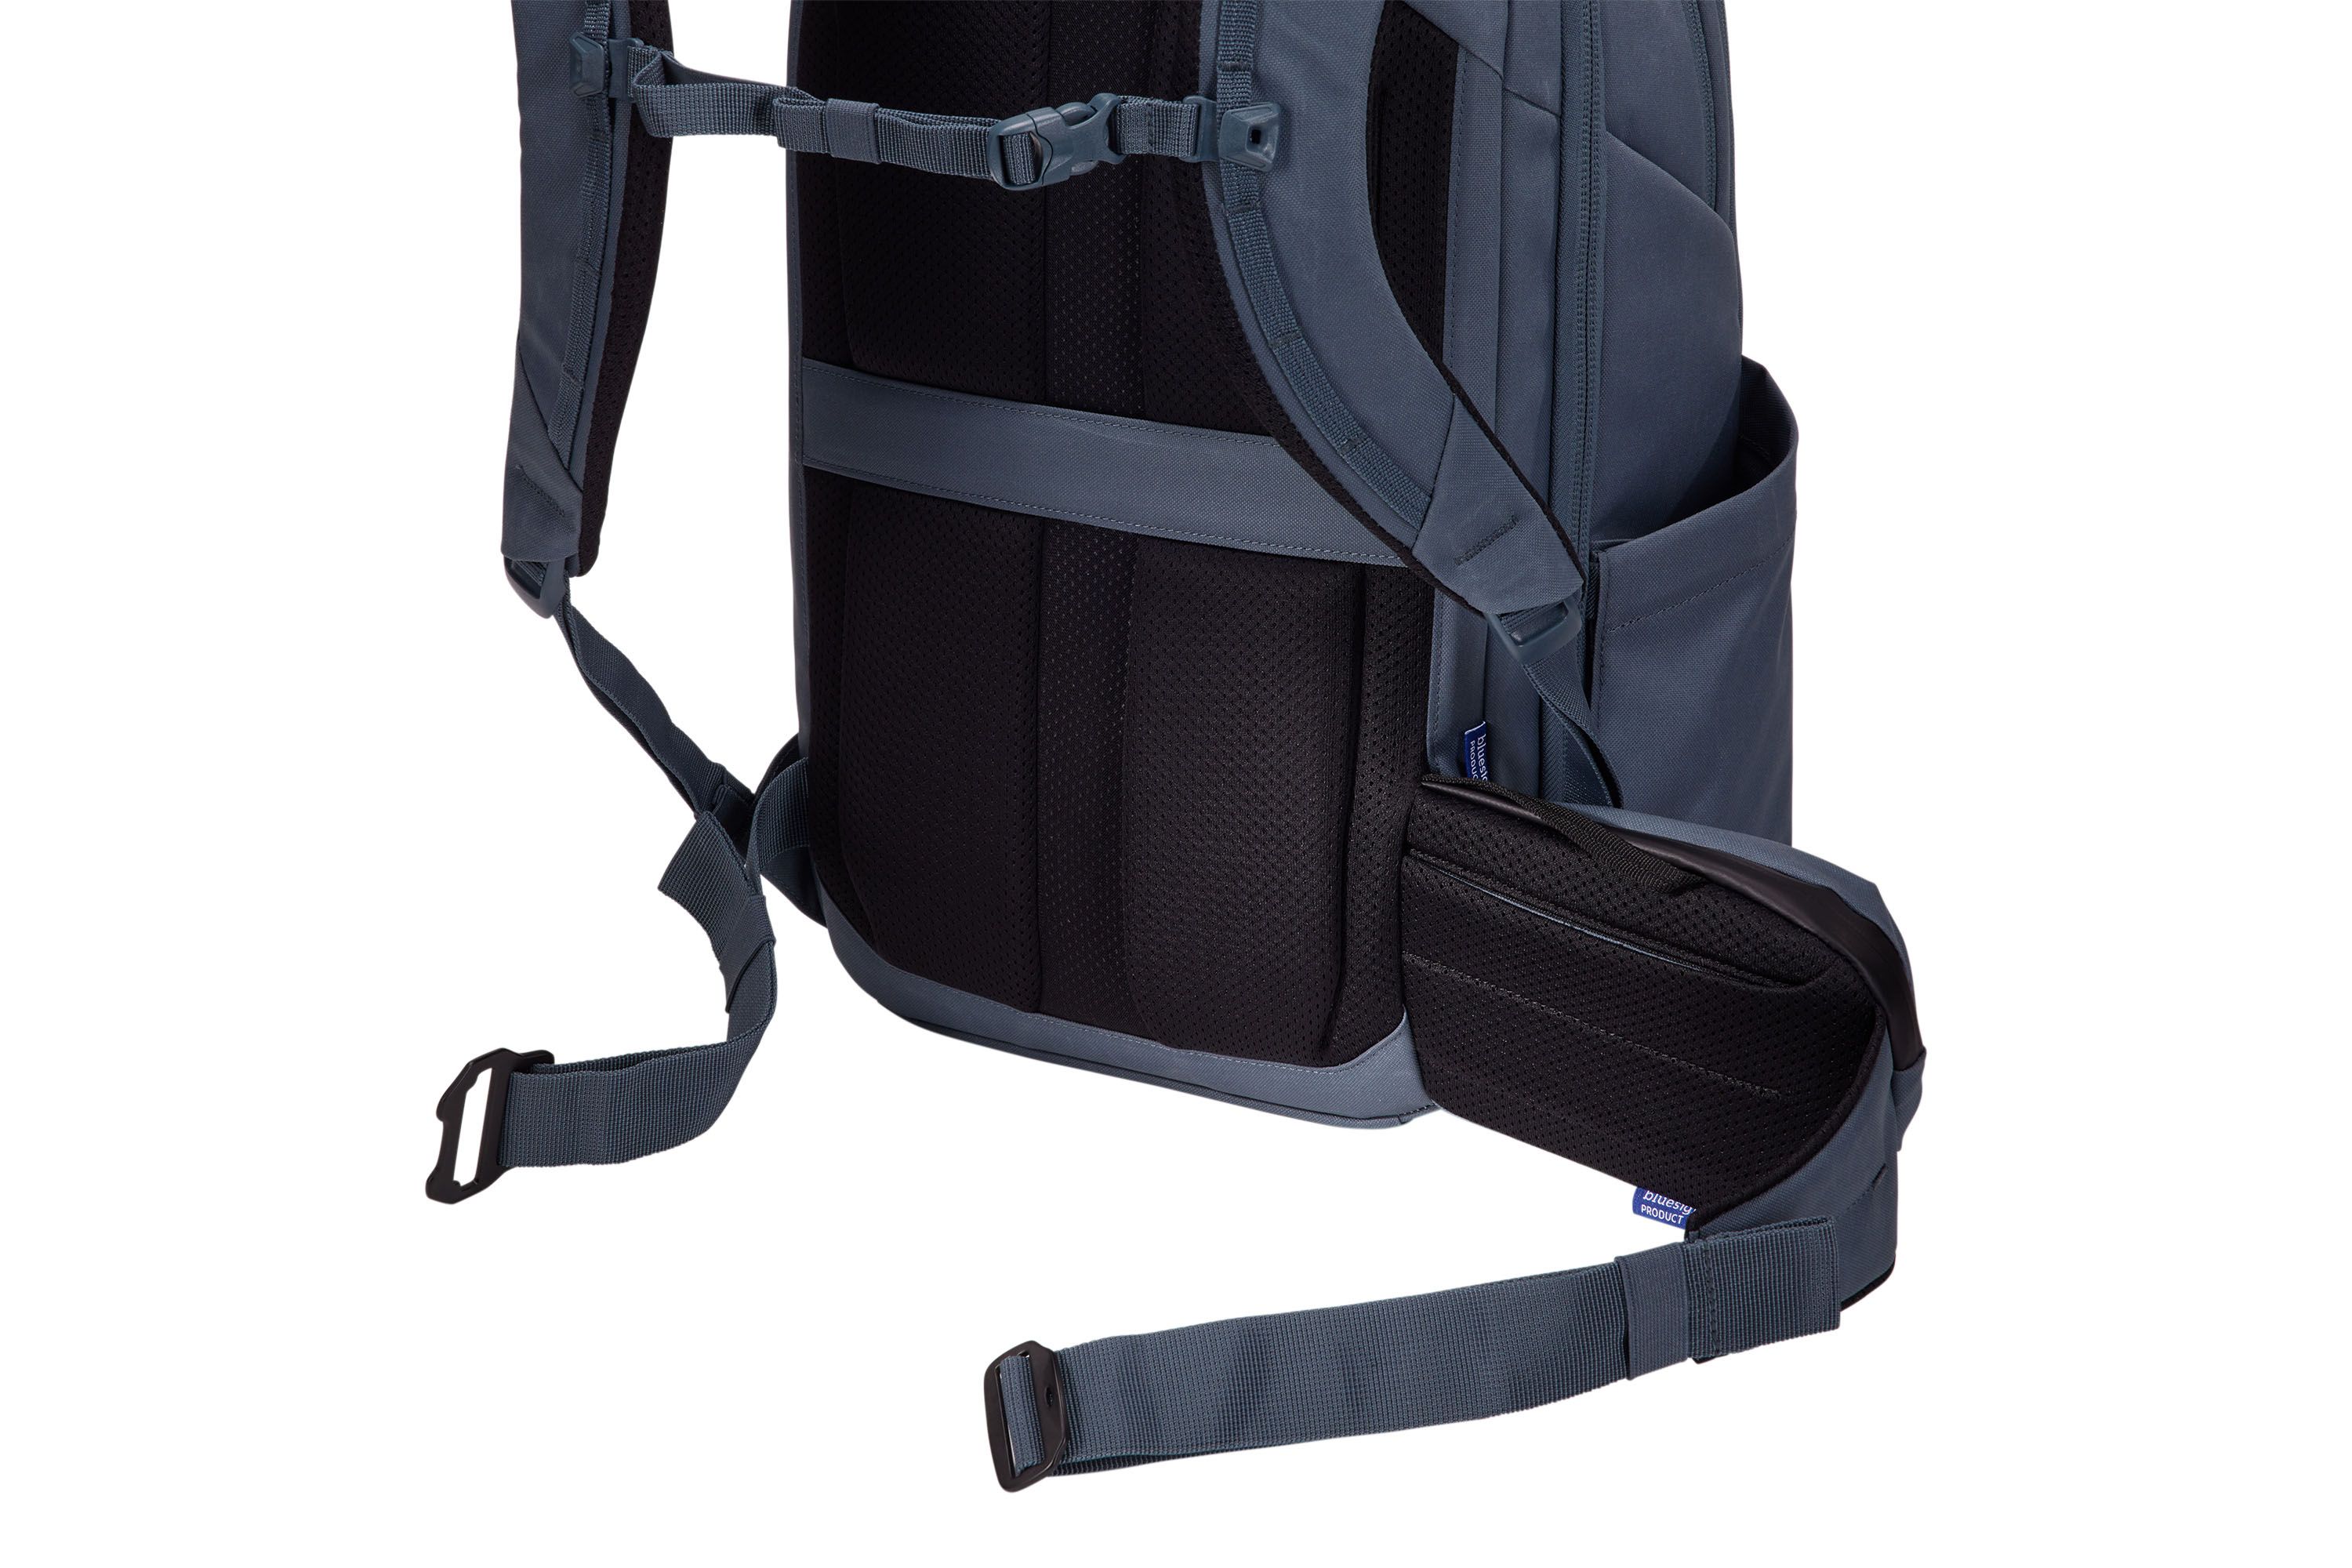 Thule Aion Backpack 28L